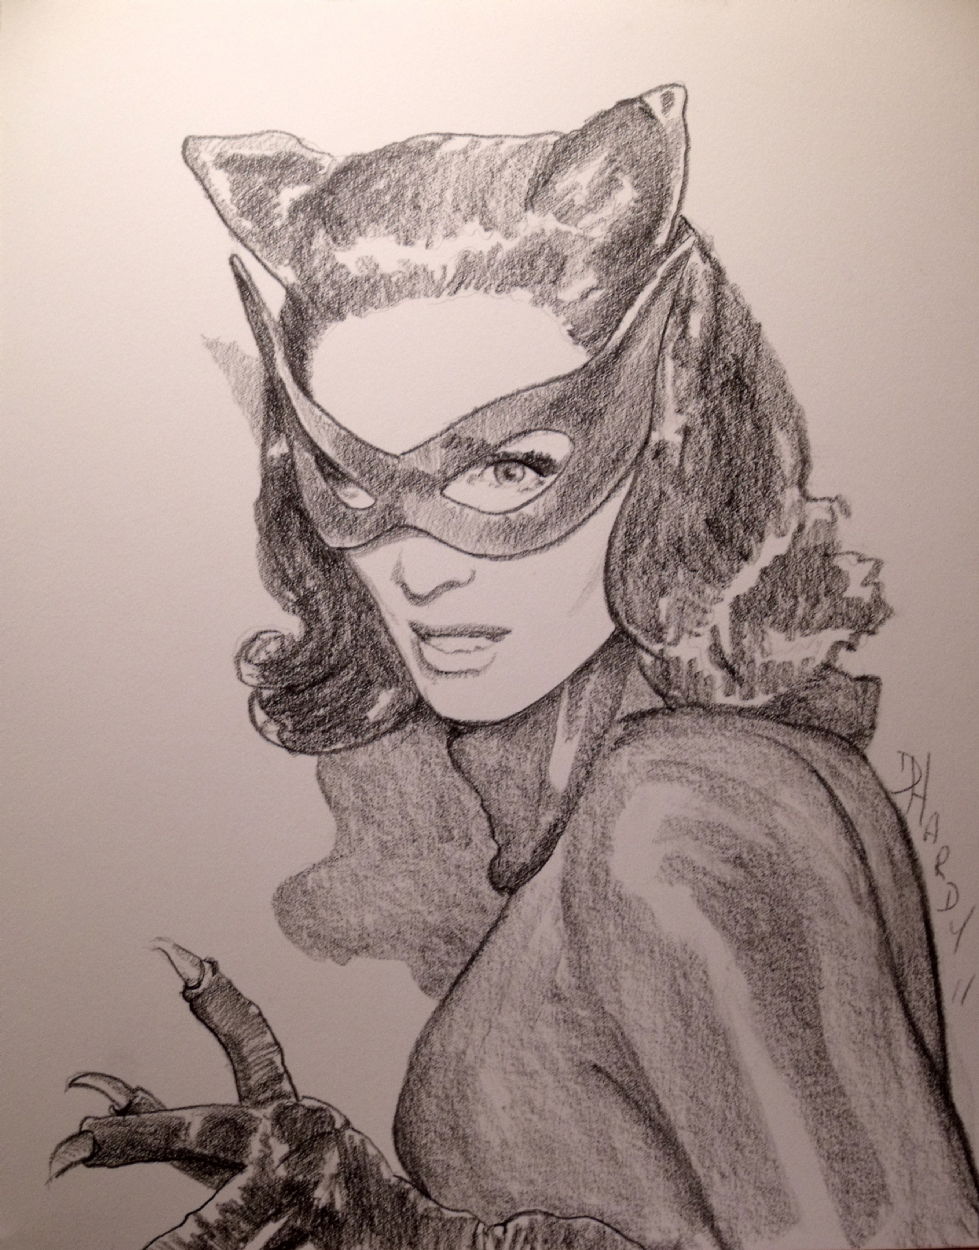 Lee Meriwether as the Catwoman ., in David Hardy's The Art of David Hardy  Comic Art Gallery Room